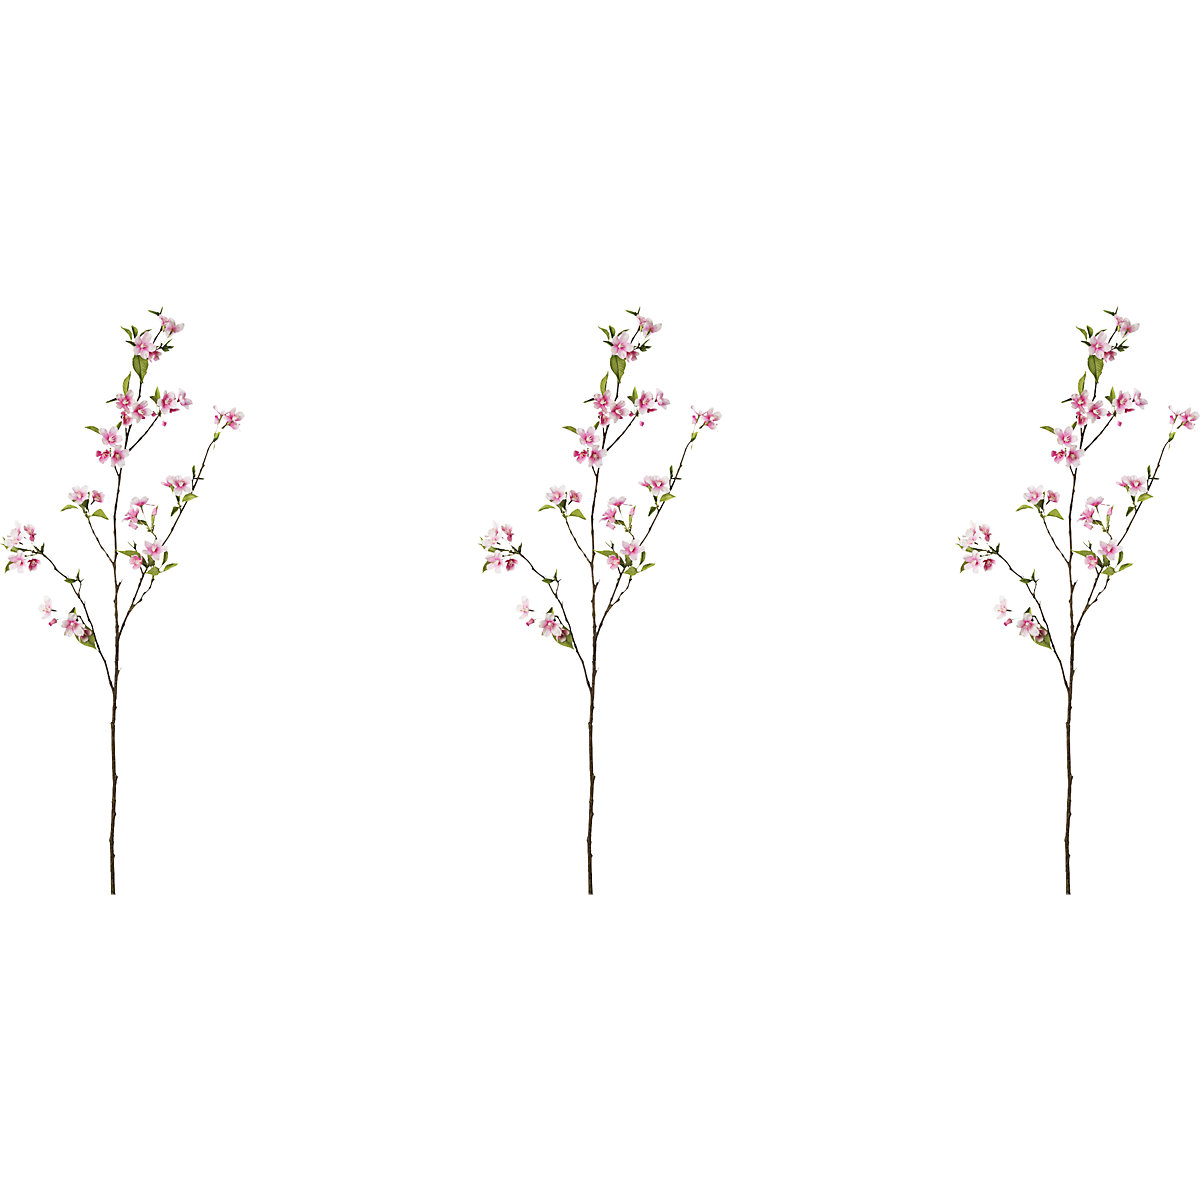 Plastic pear tree branches